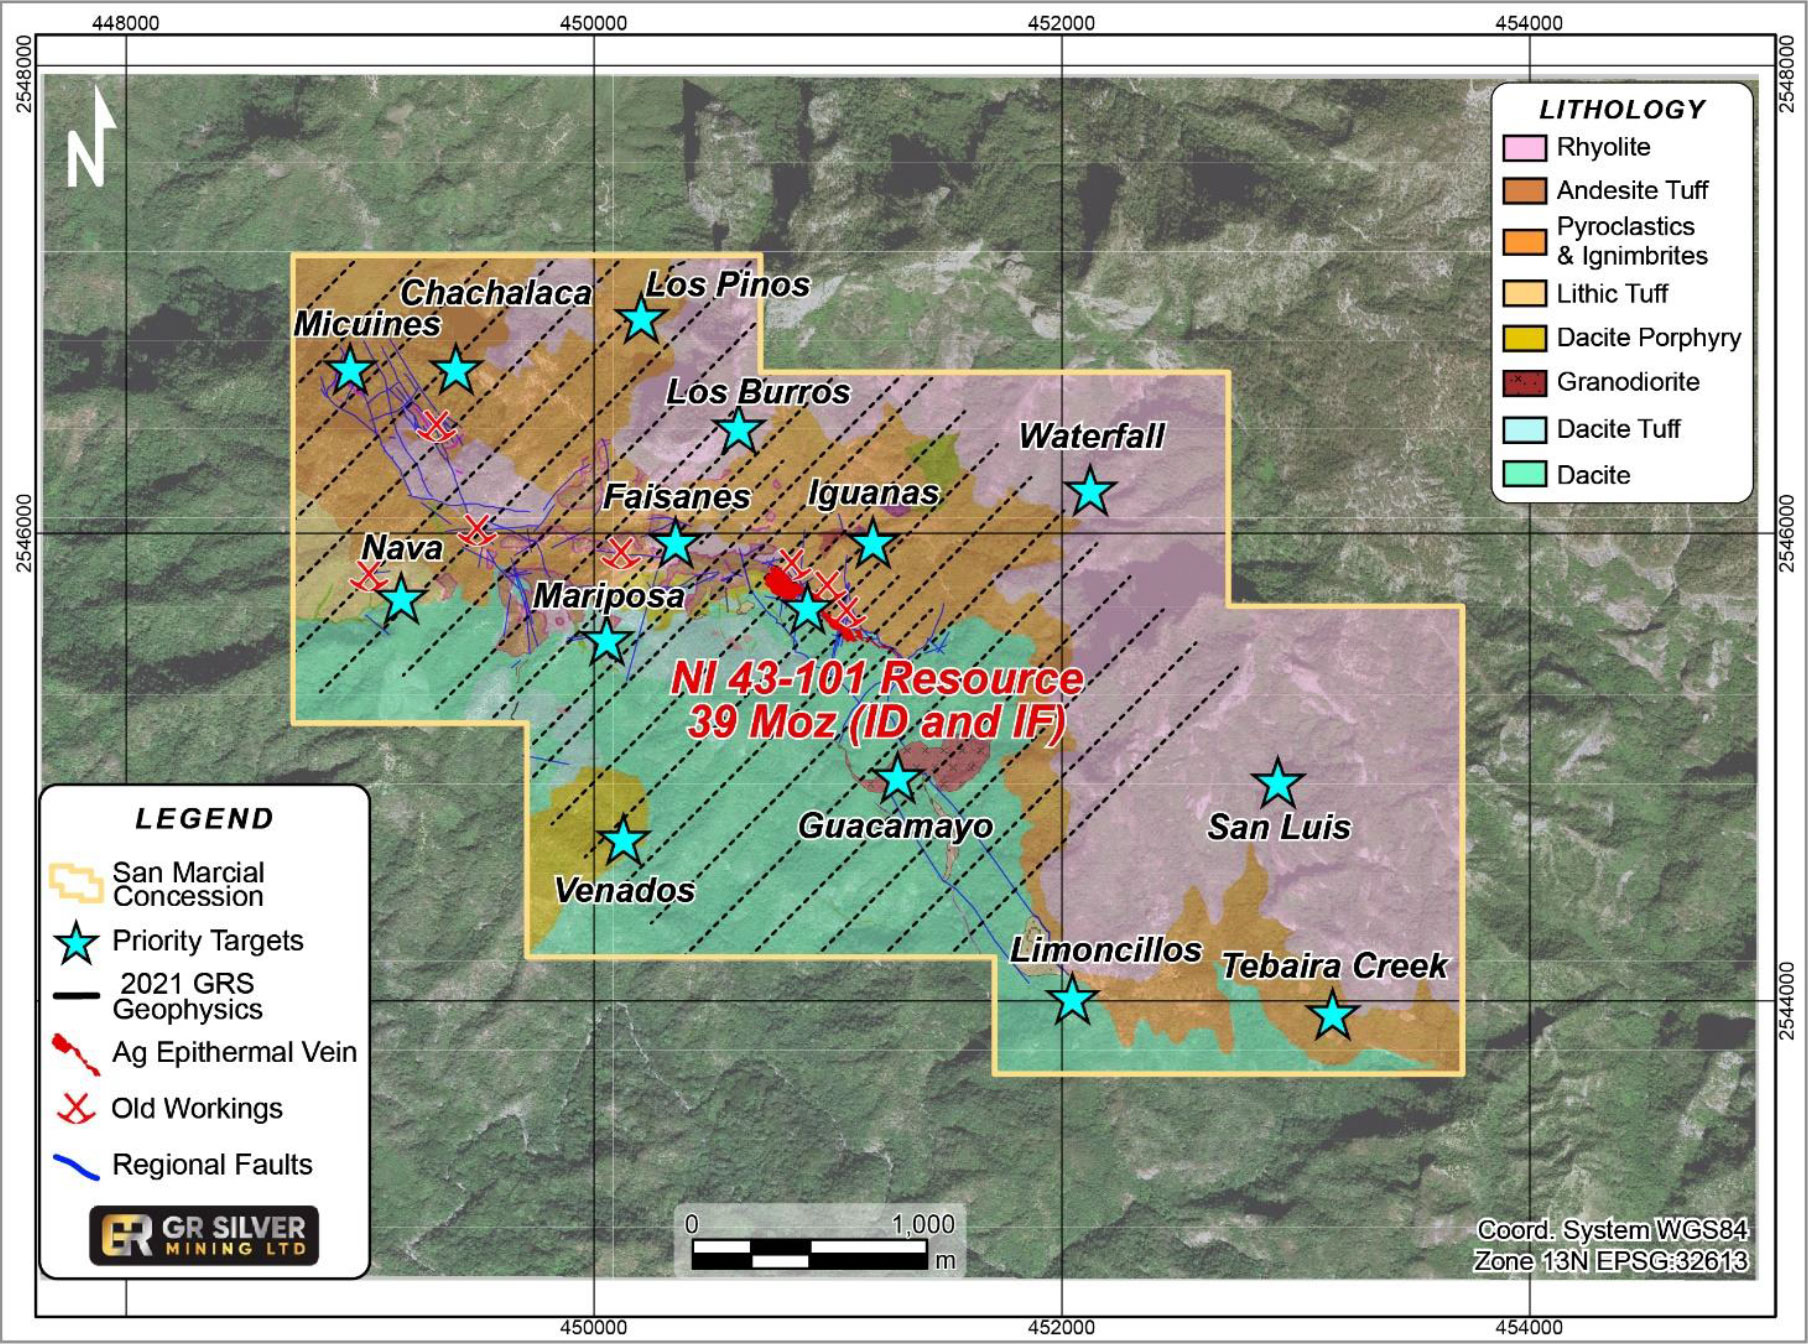 San Marcial – Concession, Geology, Targets and Geophysical Survey Lines—Feb 22, 2021